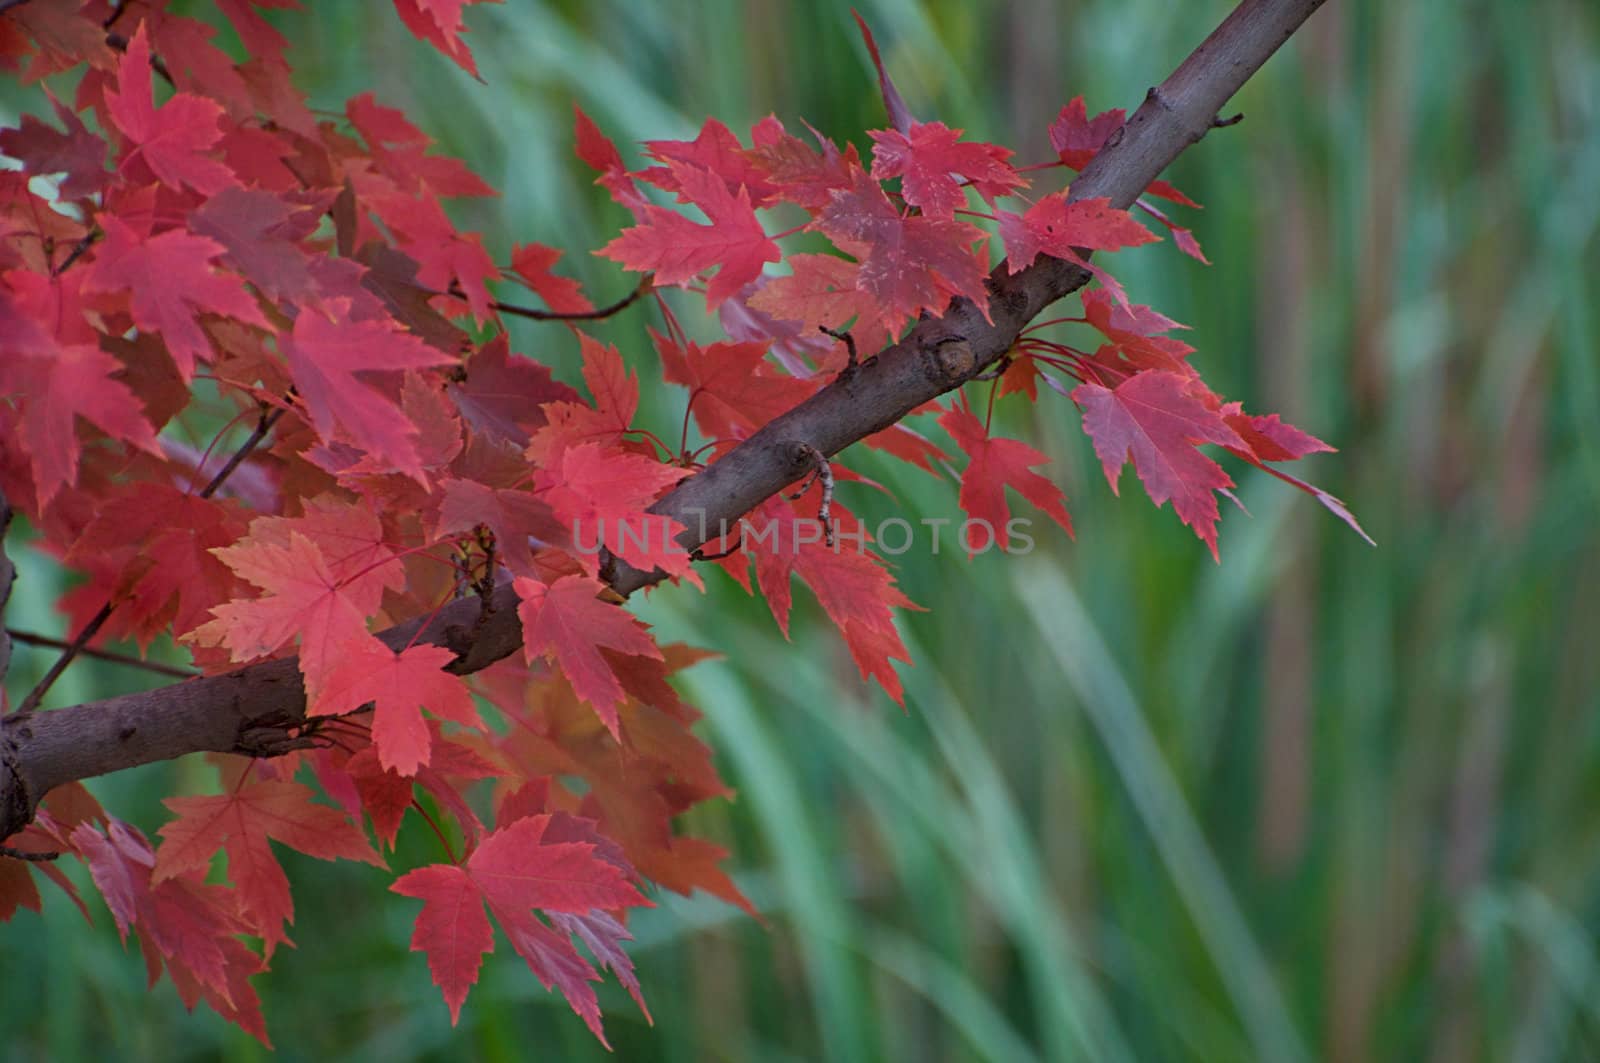 Bright red maple leaves shine against long, green grasses in the fall in Colorado.